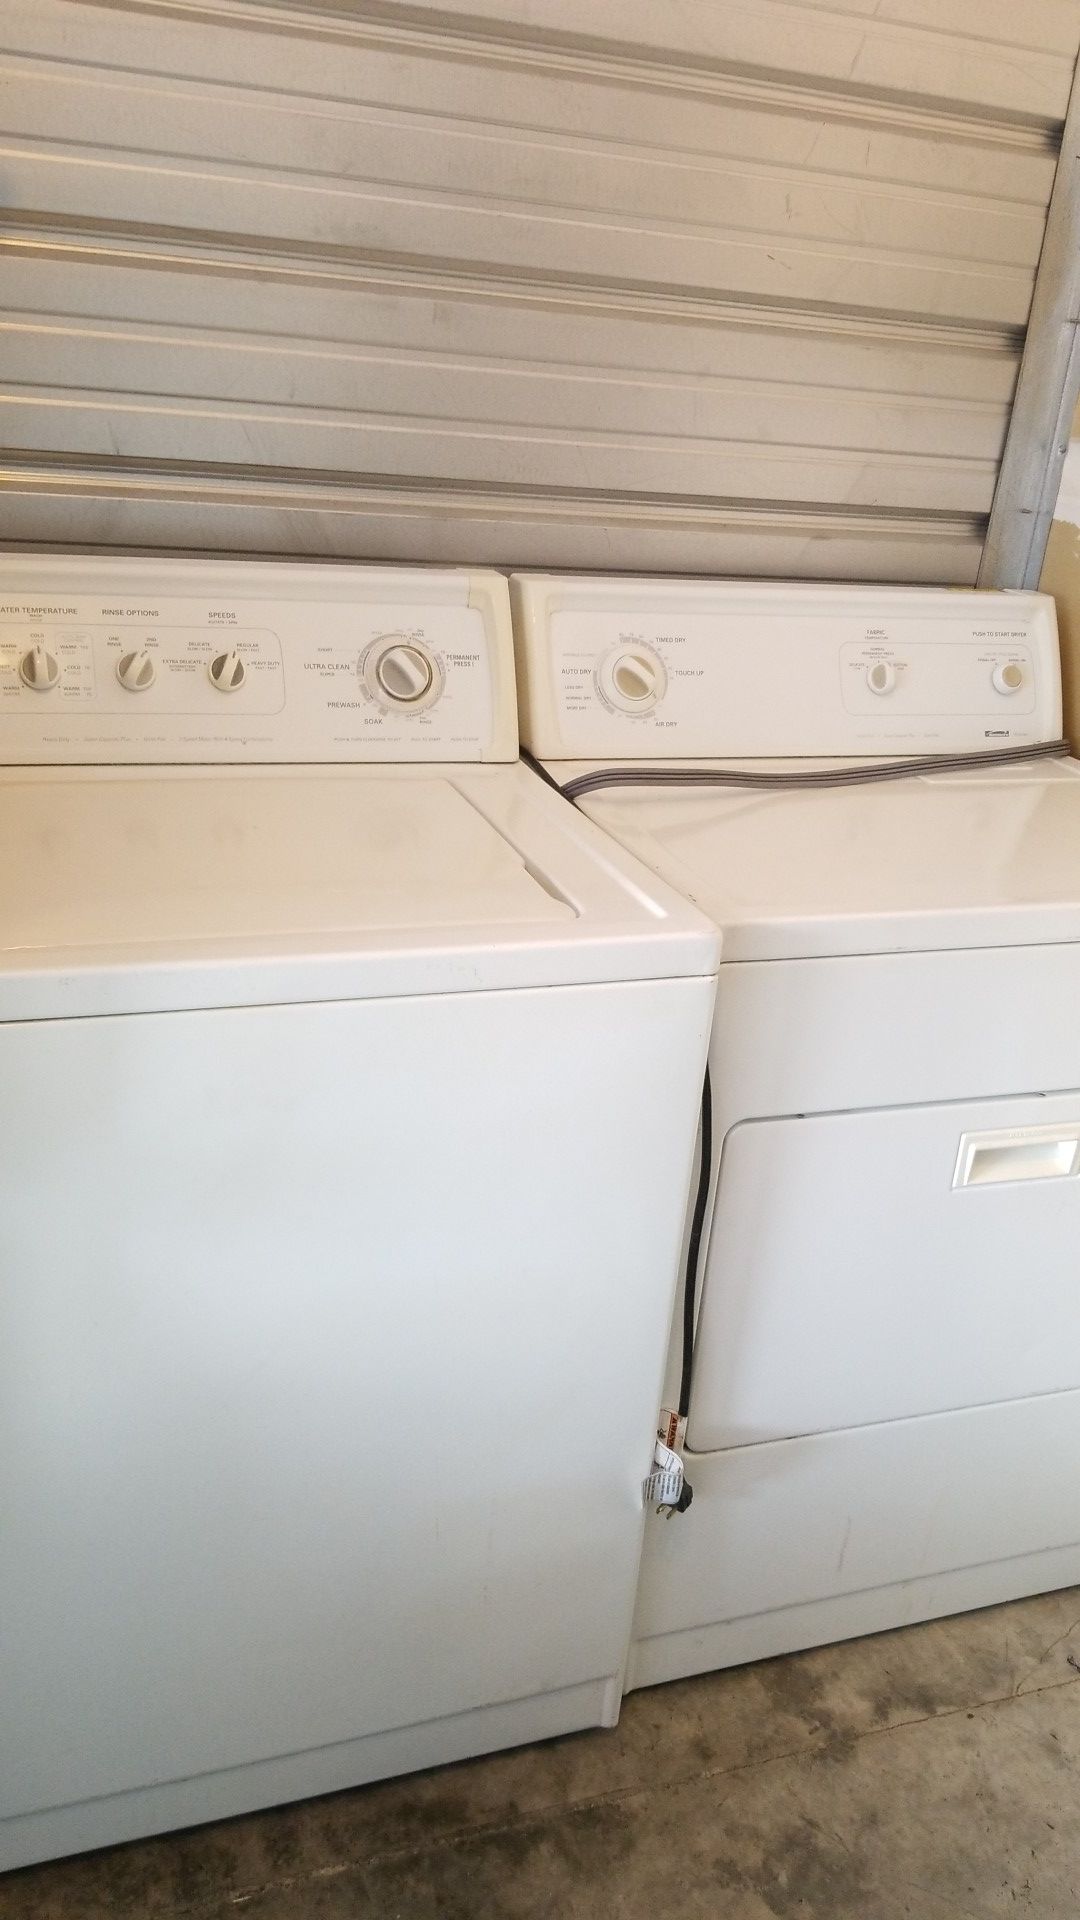 Kenmore Super Capacity Plus Washer And Dryer Set